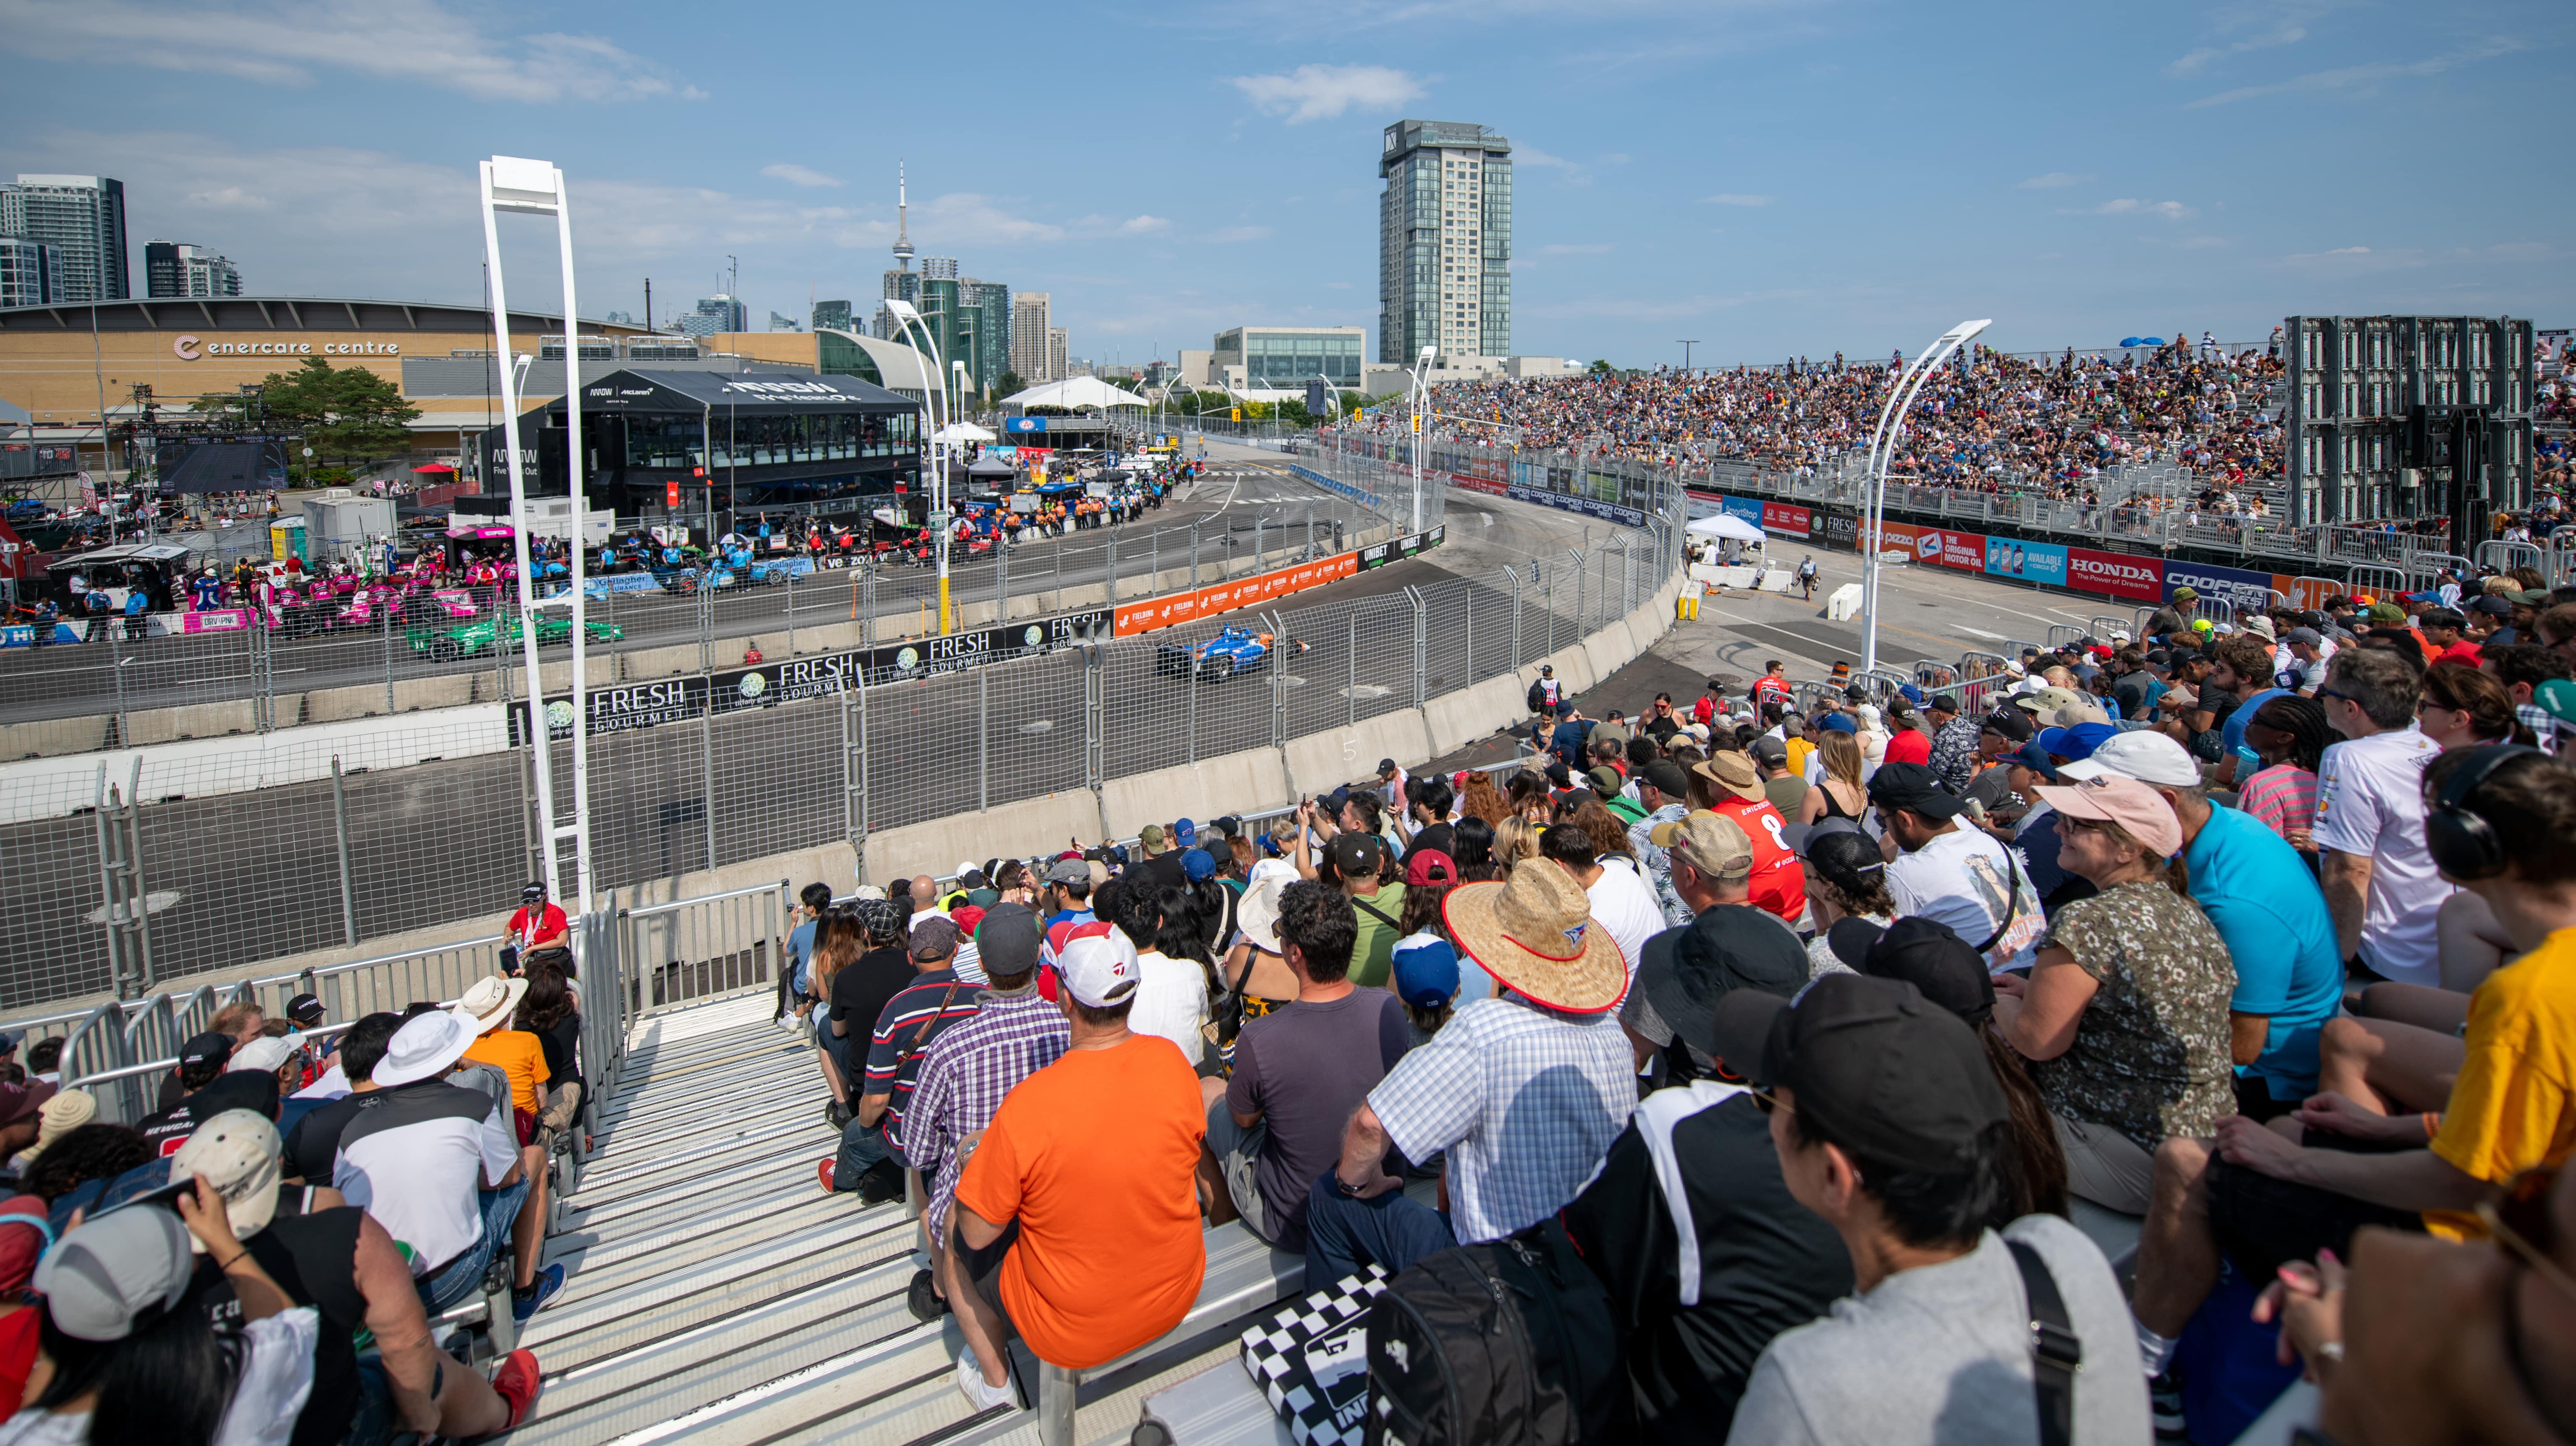 A crowded grandstand at the Honda Indy Toronto atop sponsor signage